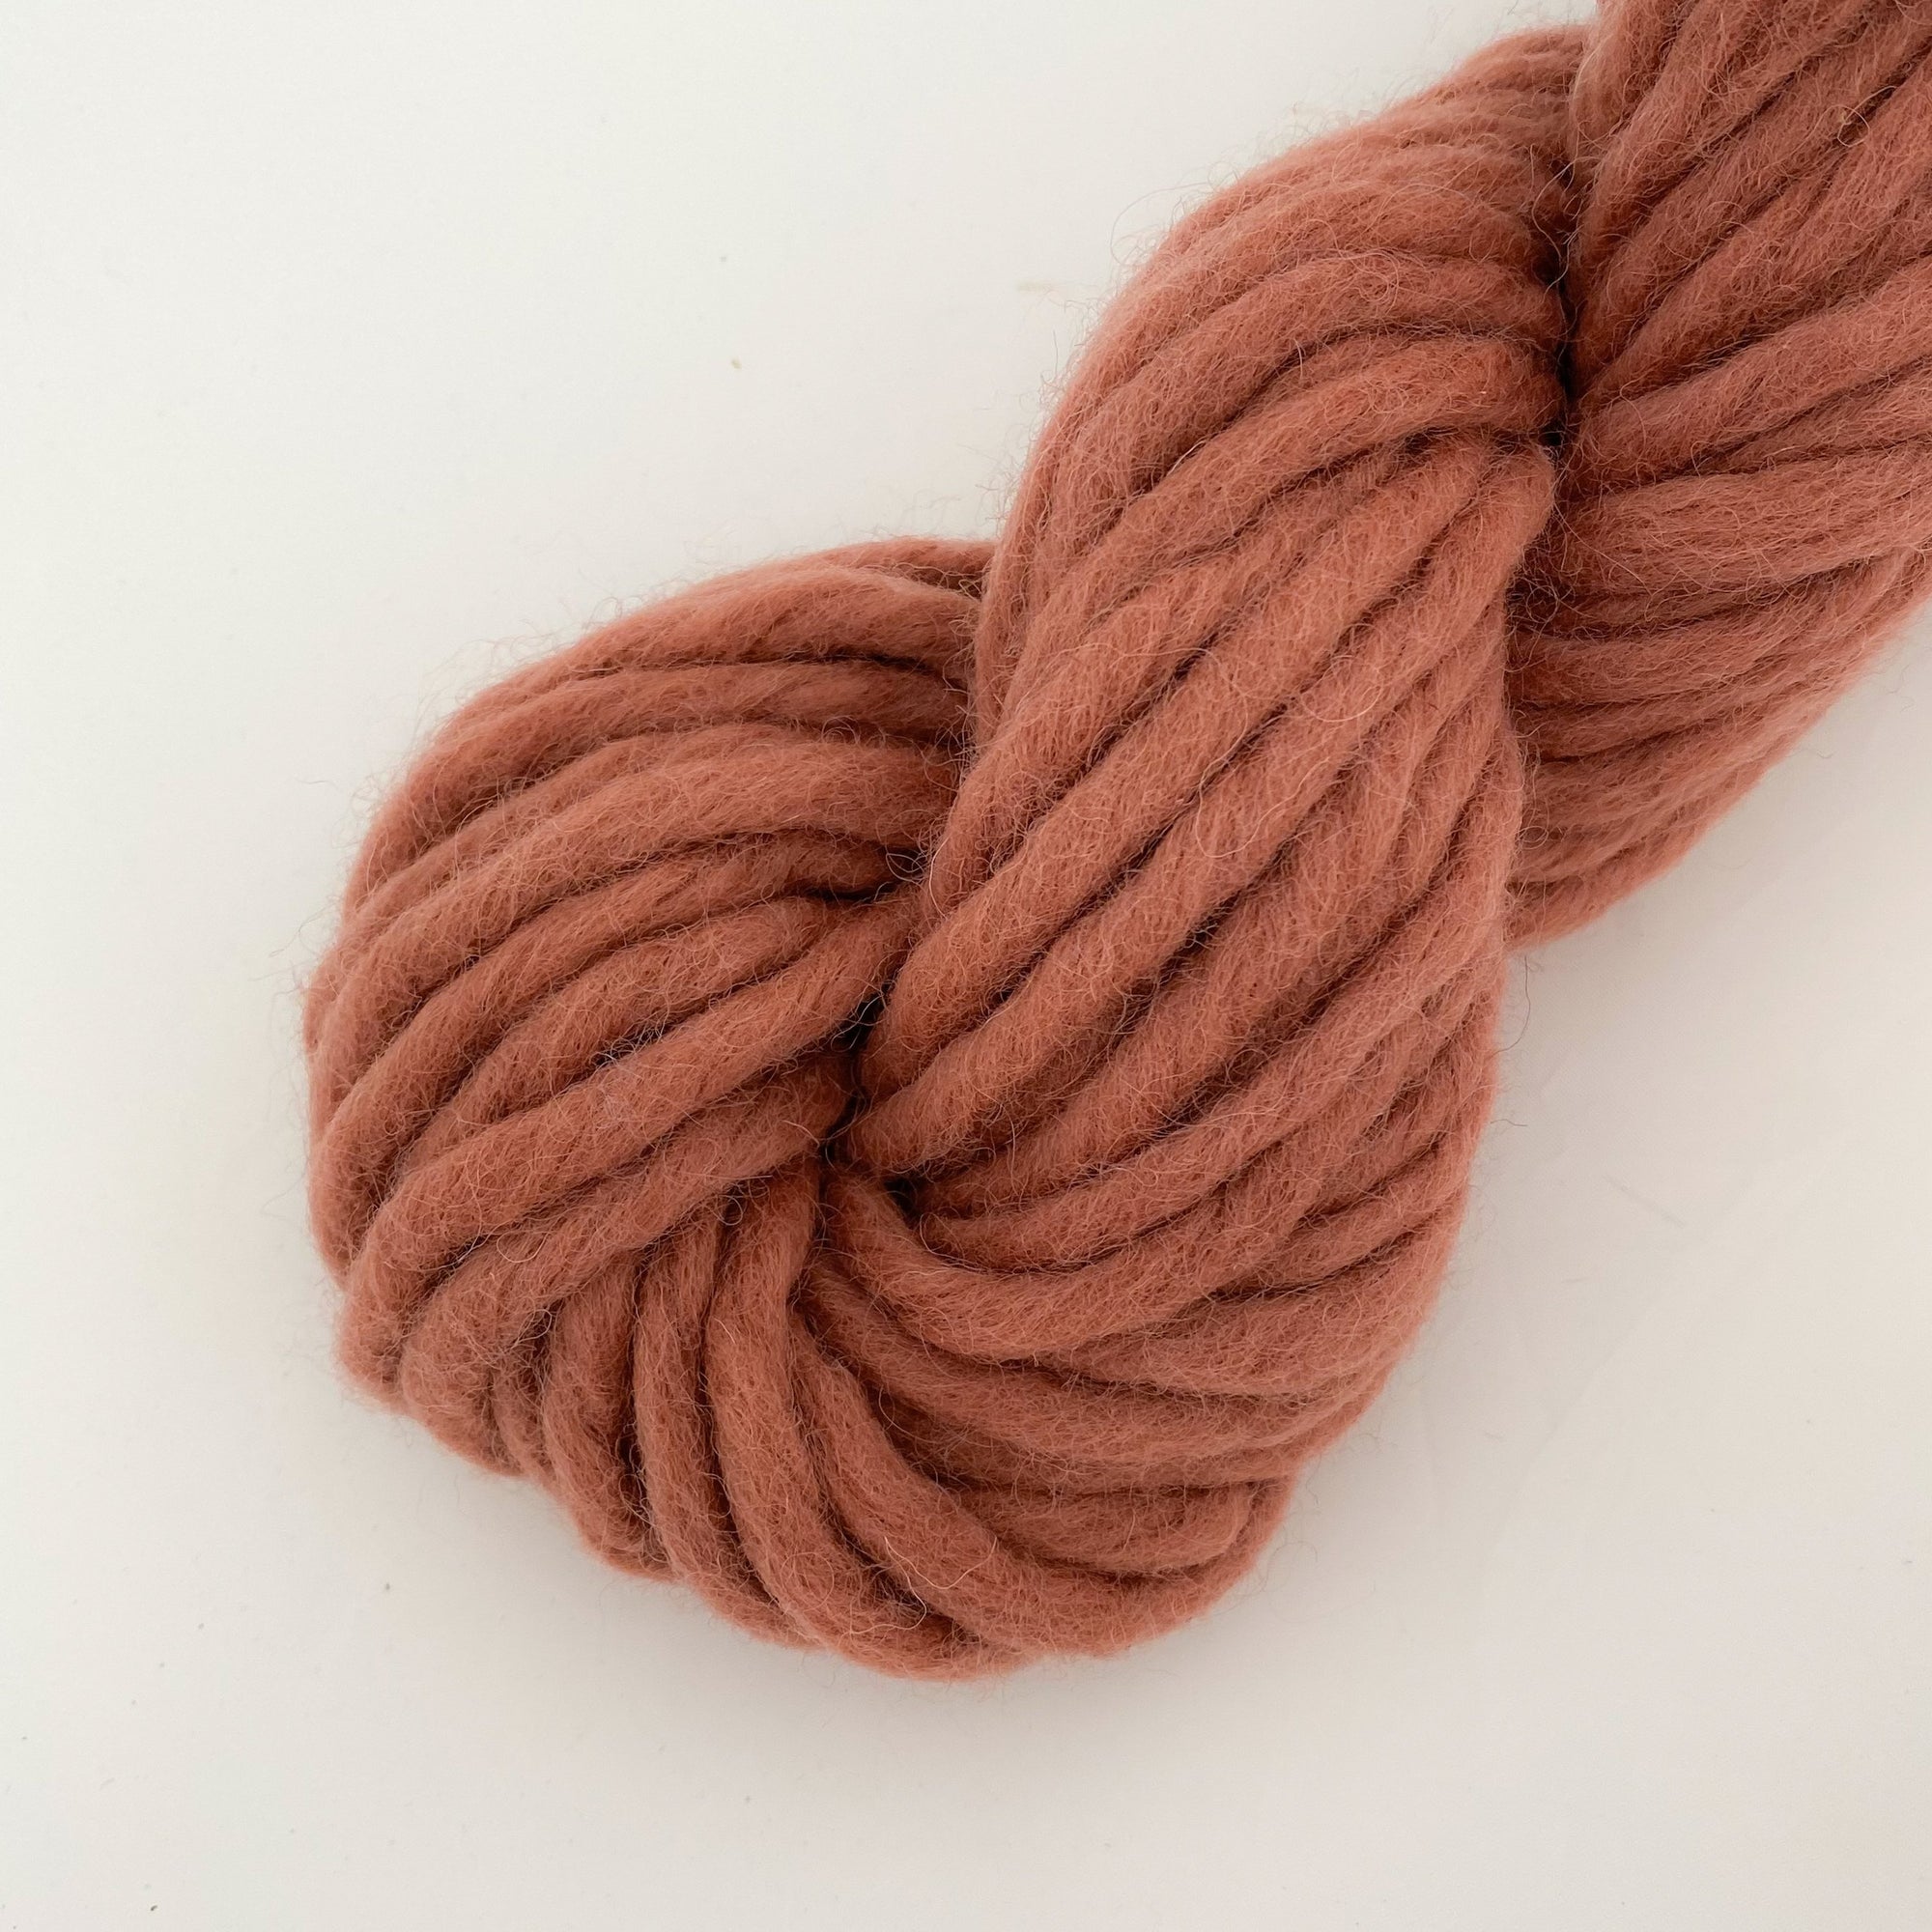 Mary Maker Studio speciality fibre Terracotta Felted Finger Rope macrame cotton macrame rope macrame workshop macrame patterns macrame